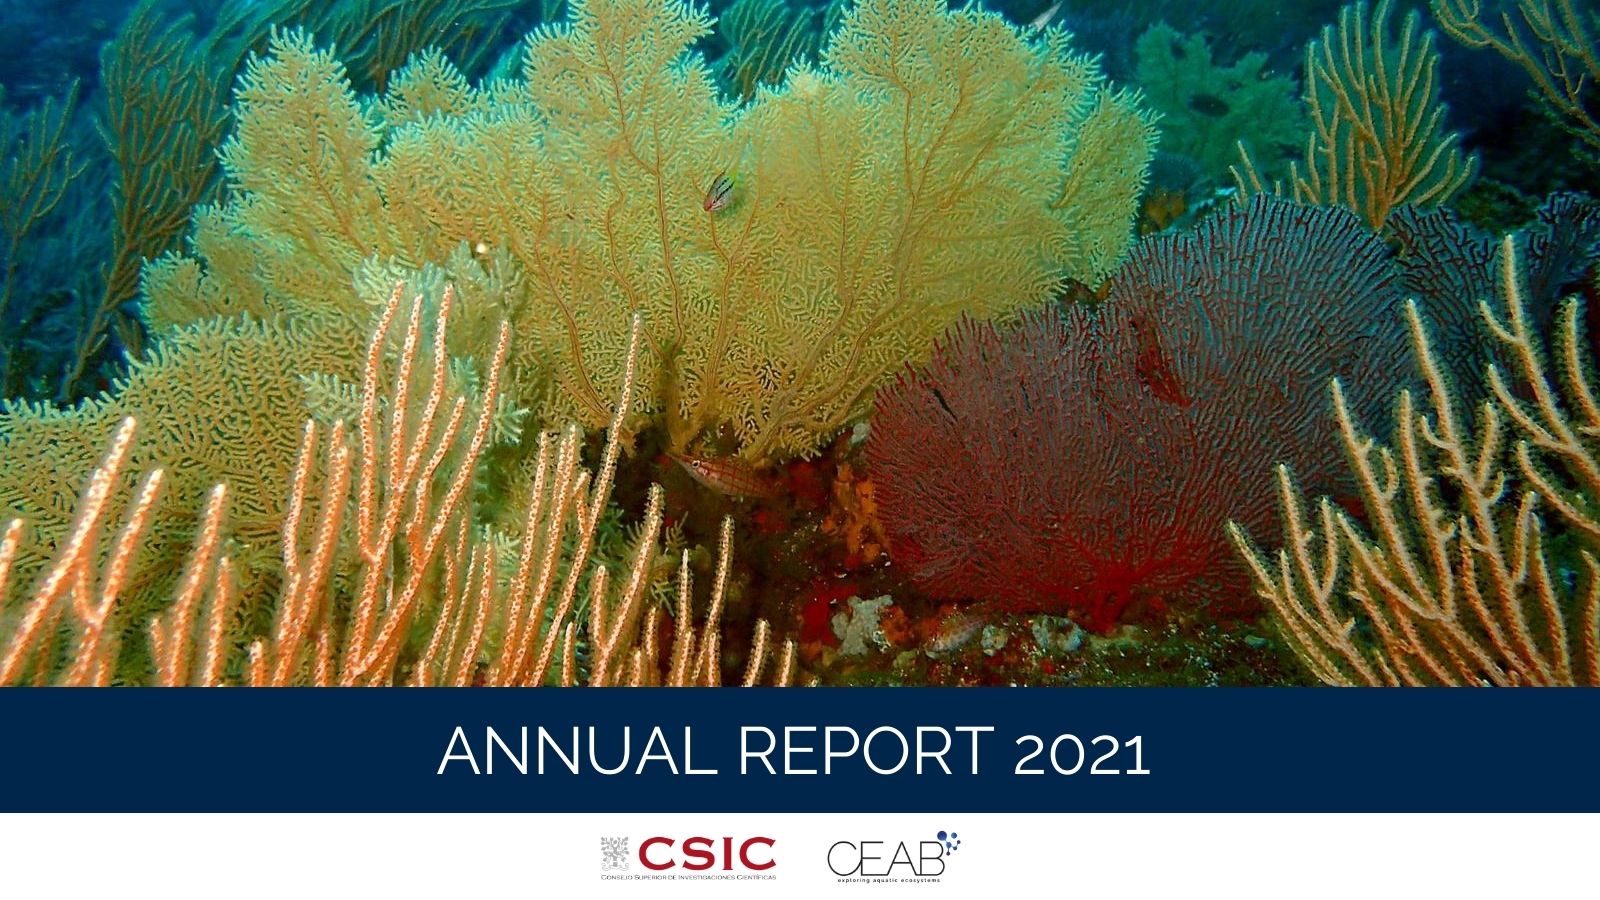 The 2021 Annual Report of the CEAB-CSIC has been published